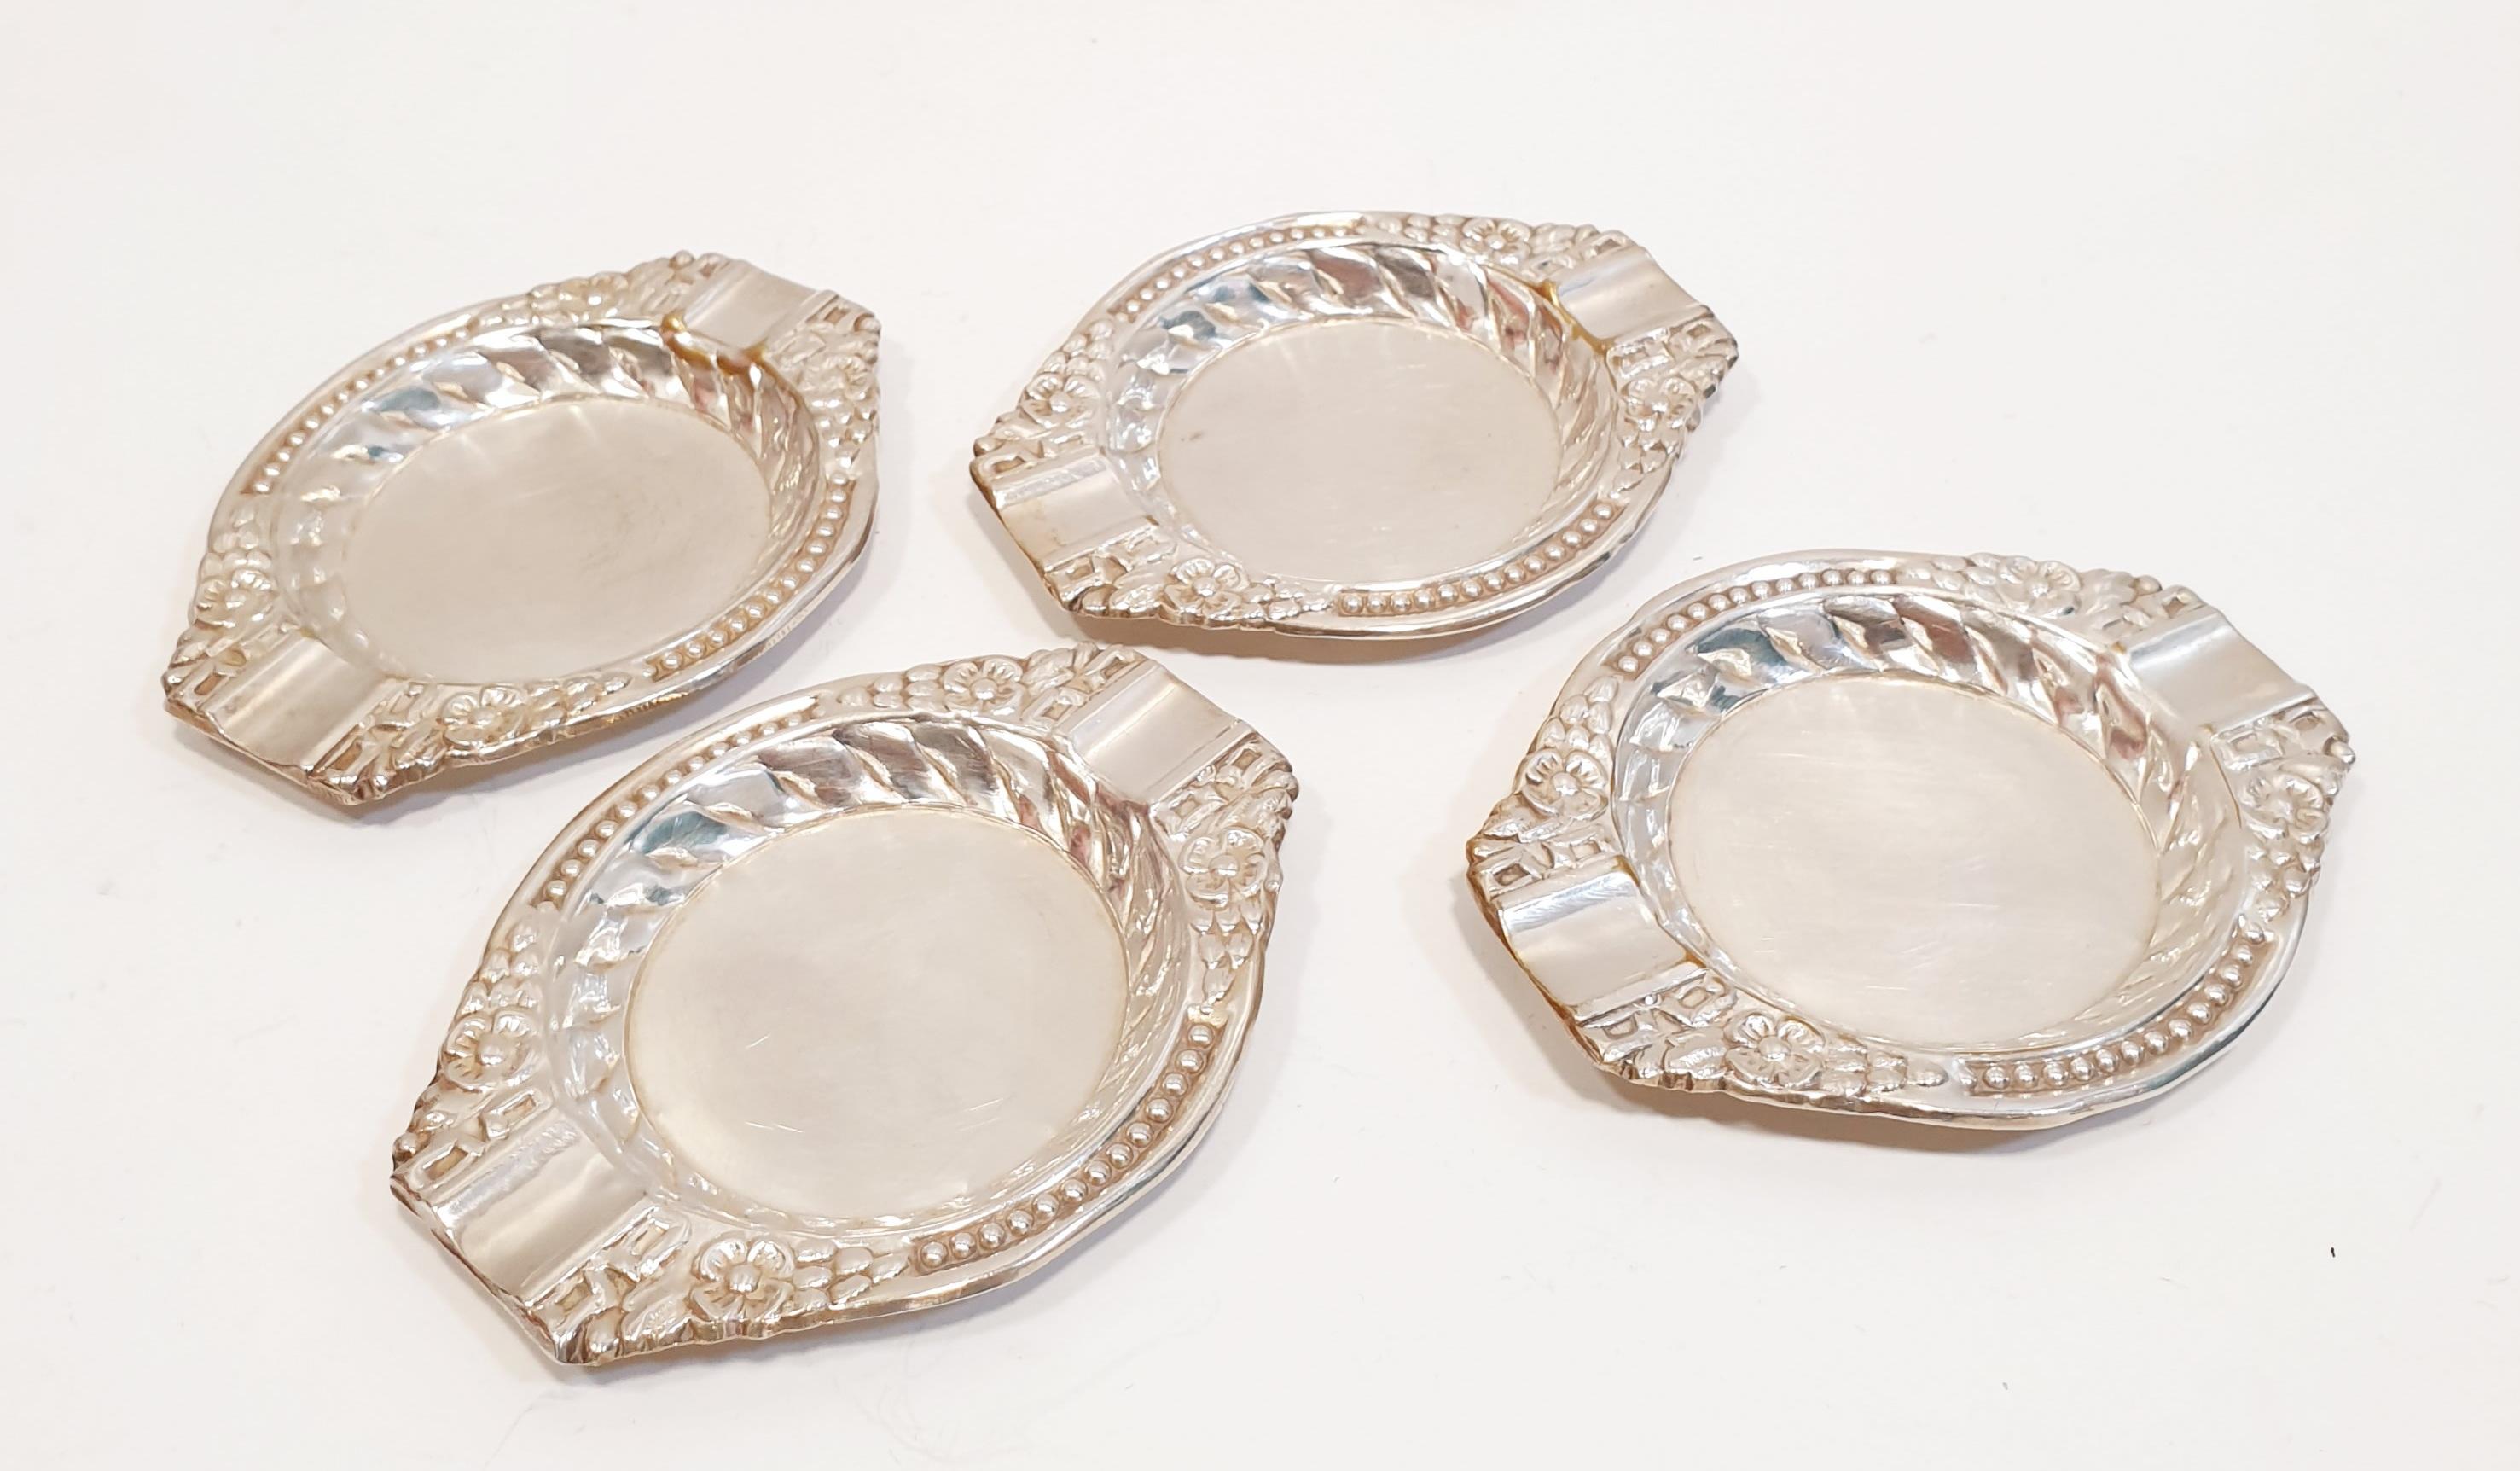 19th century silver ashtray set of 4

PRADERA is a second generation of a family run business jewelers of reference in Spain, with a rich track record being official distributers of prime European jewelry brands like Chanel, Baccarat, Pomellato,